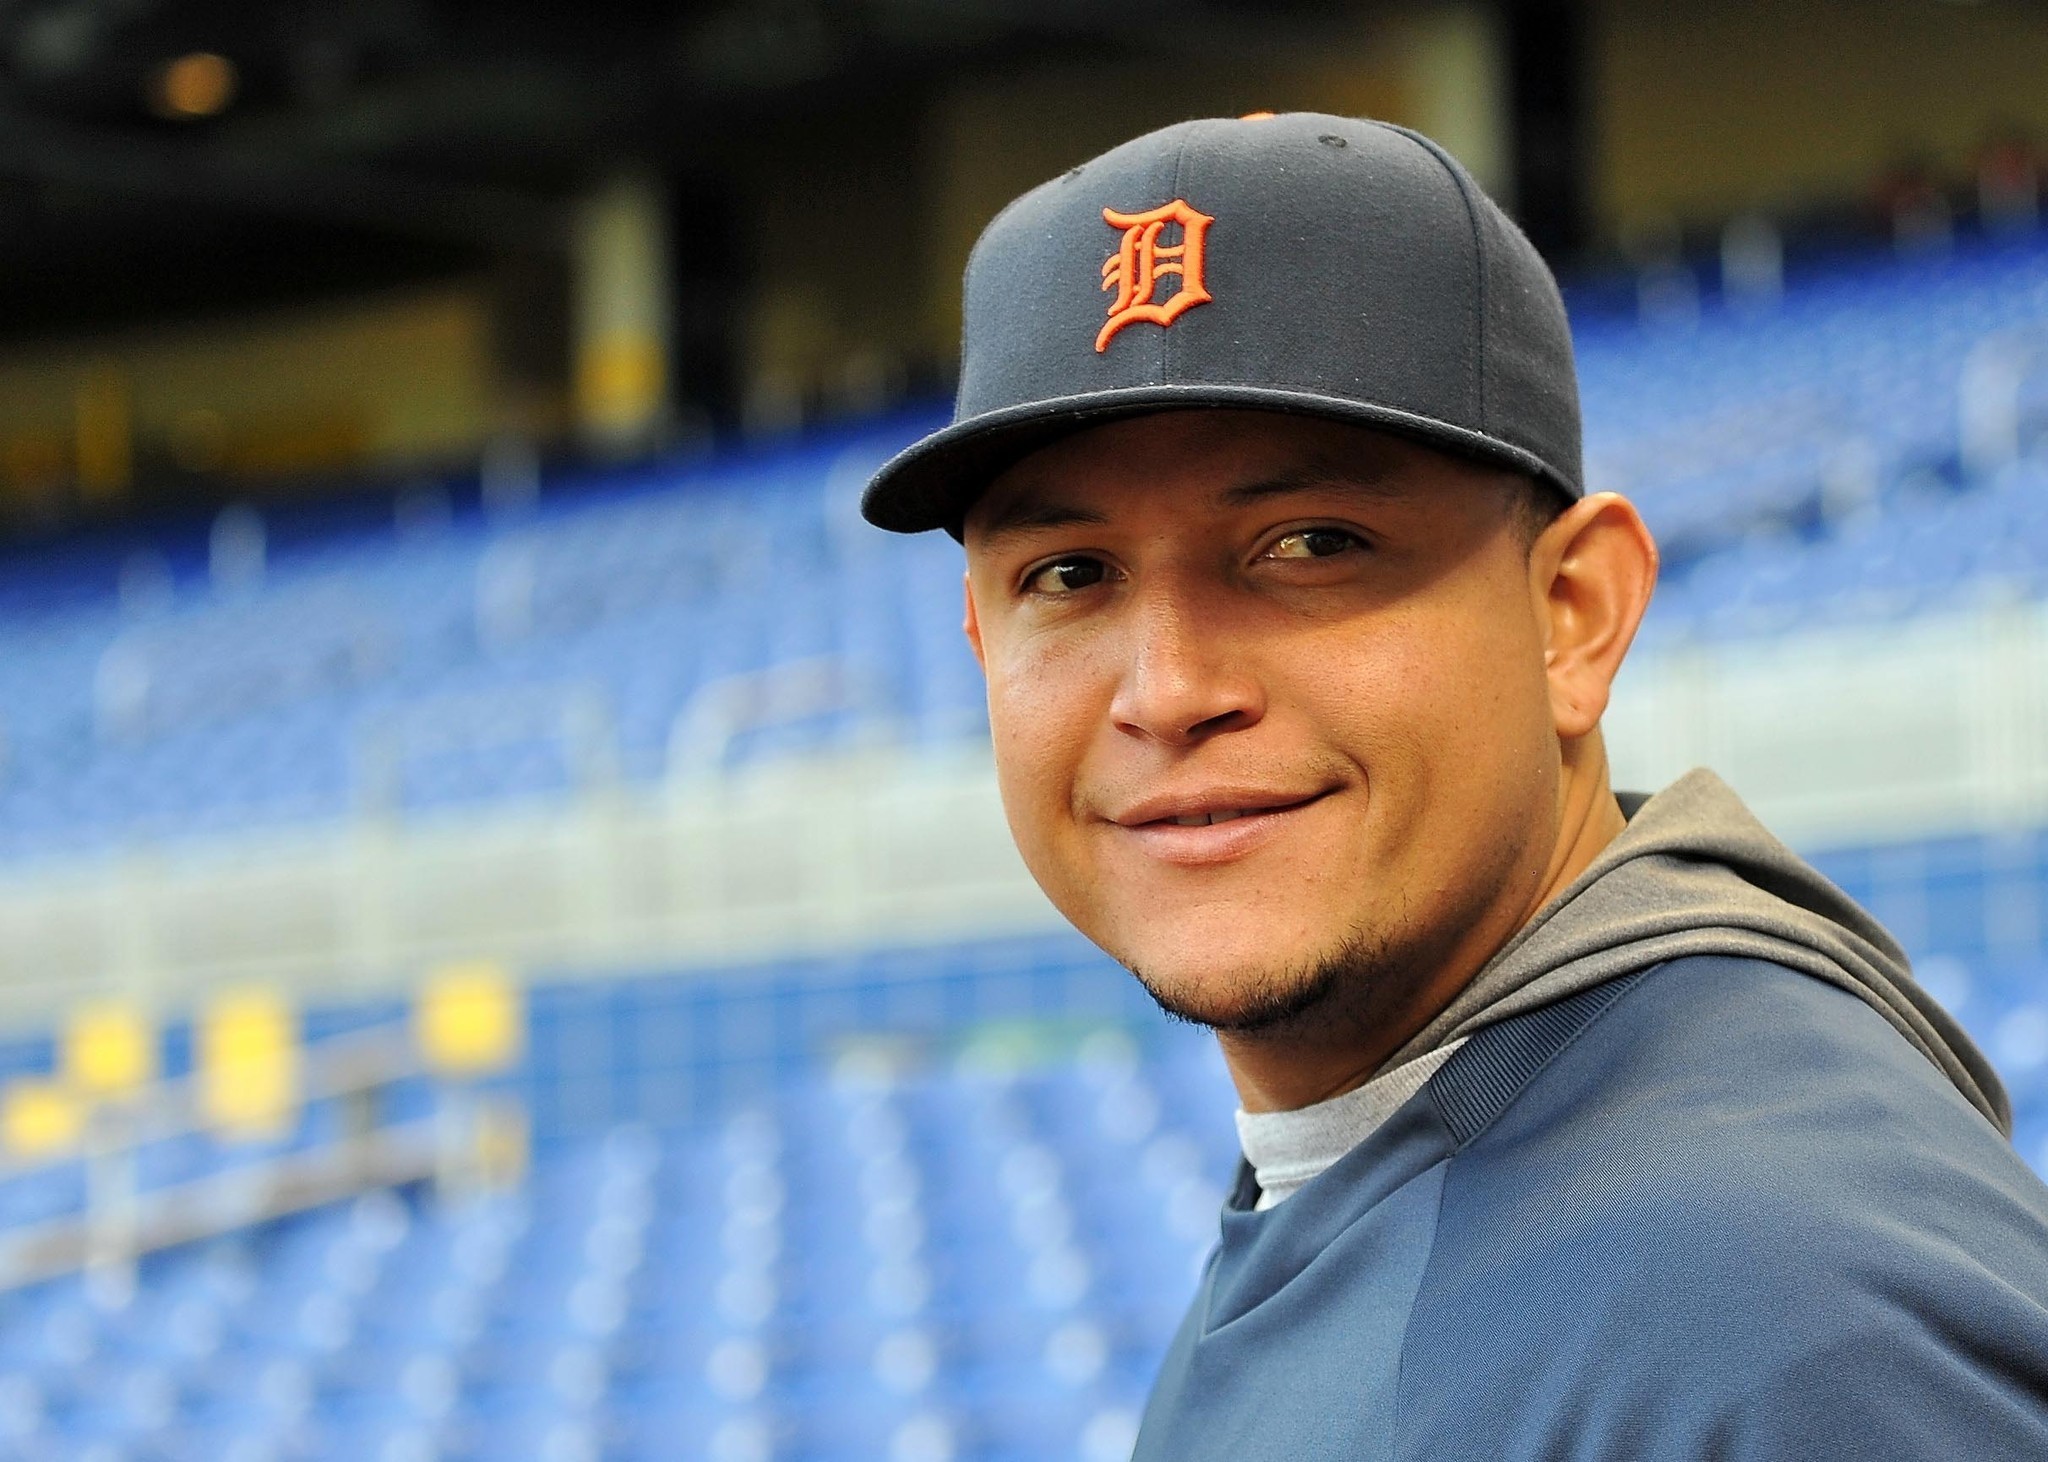 Miguel Cabrera warmly received in first game against Miami Marlins - Sun Sentinel